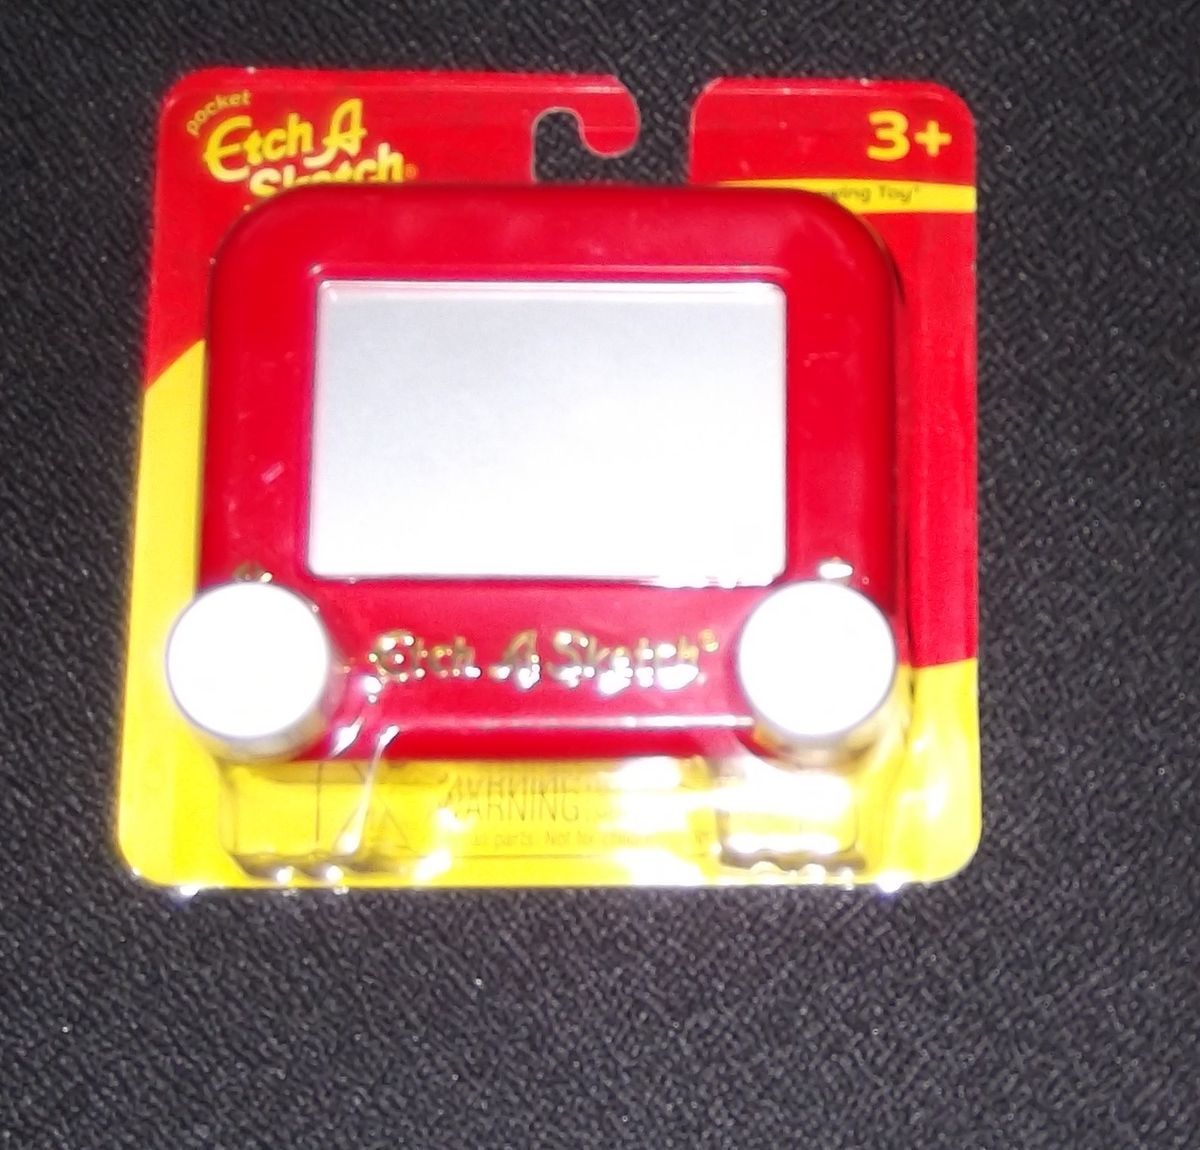 Ohio Art Pocket Etch A Sketch Drawing Toy New Classic Red